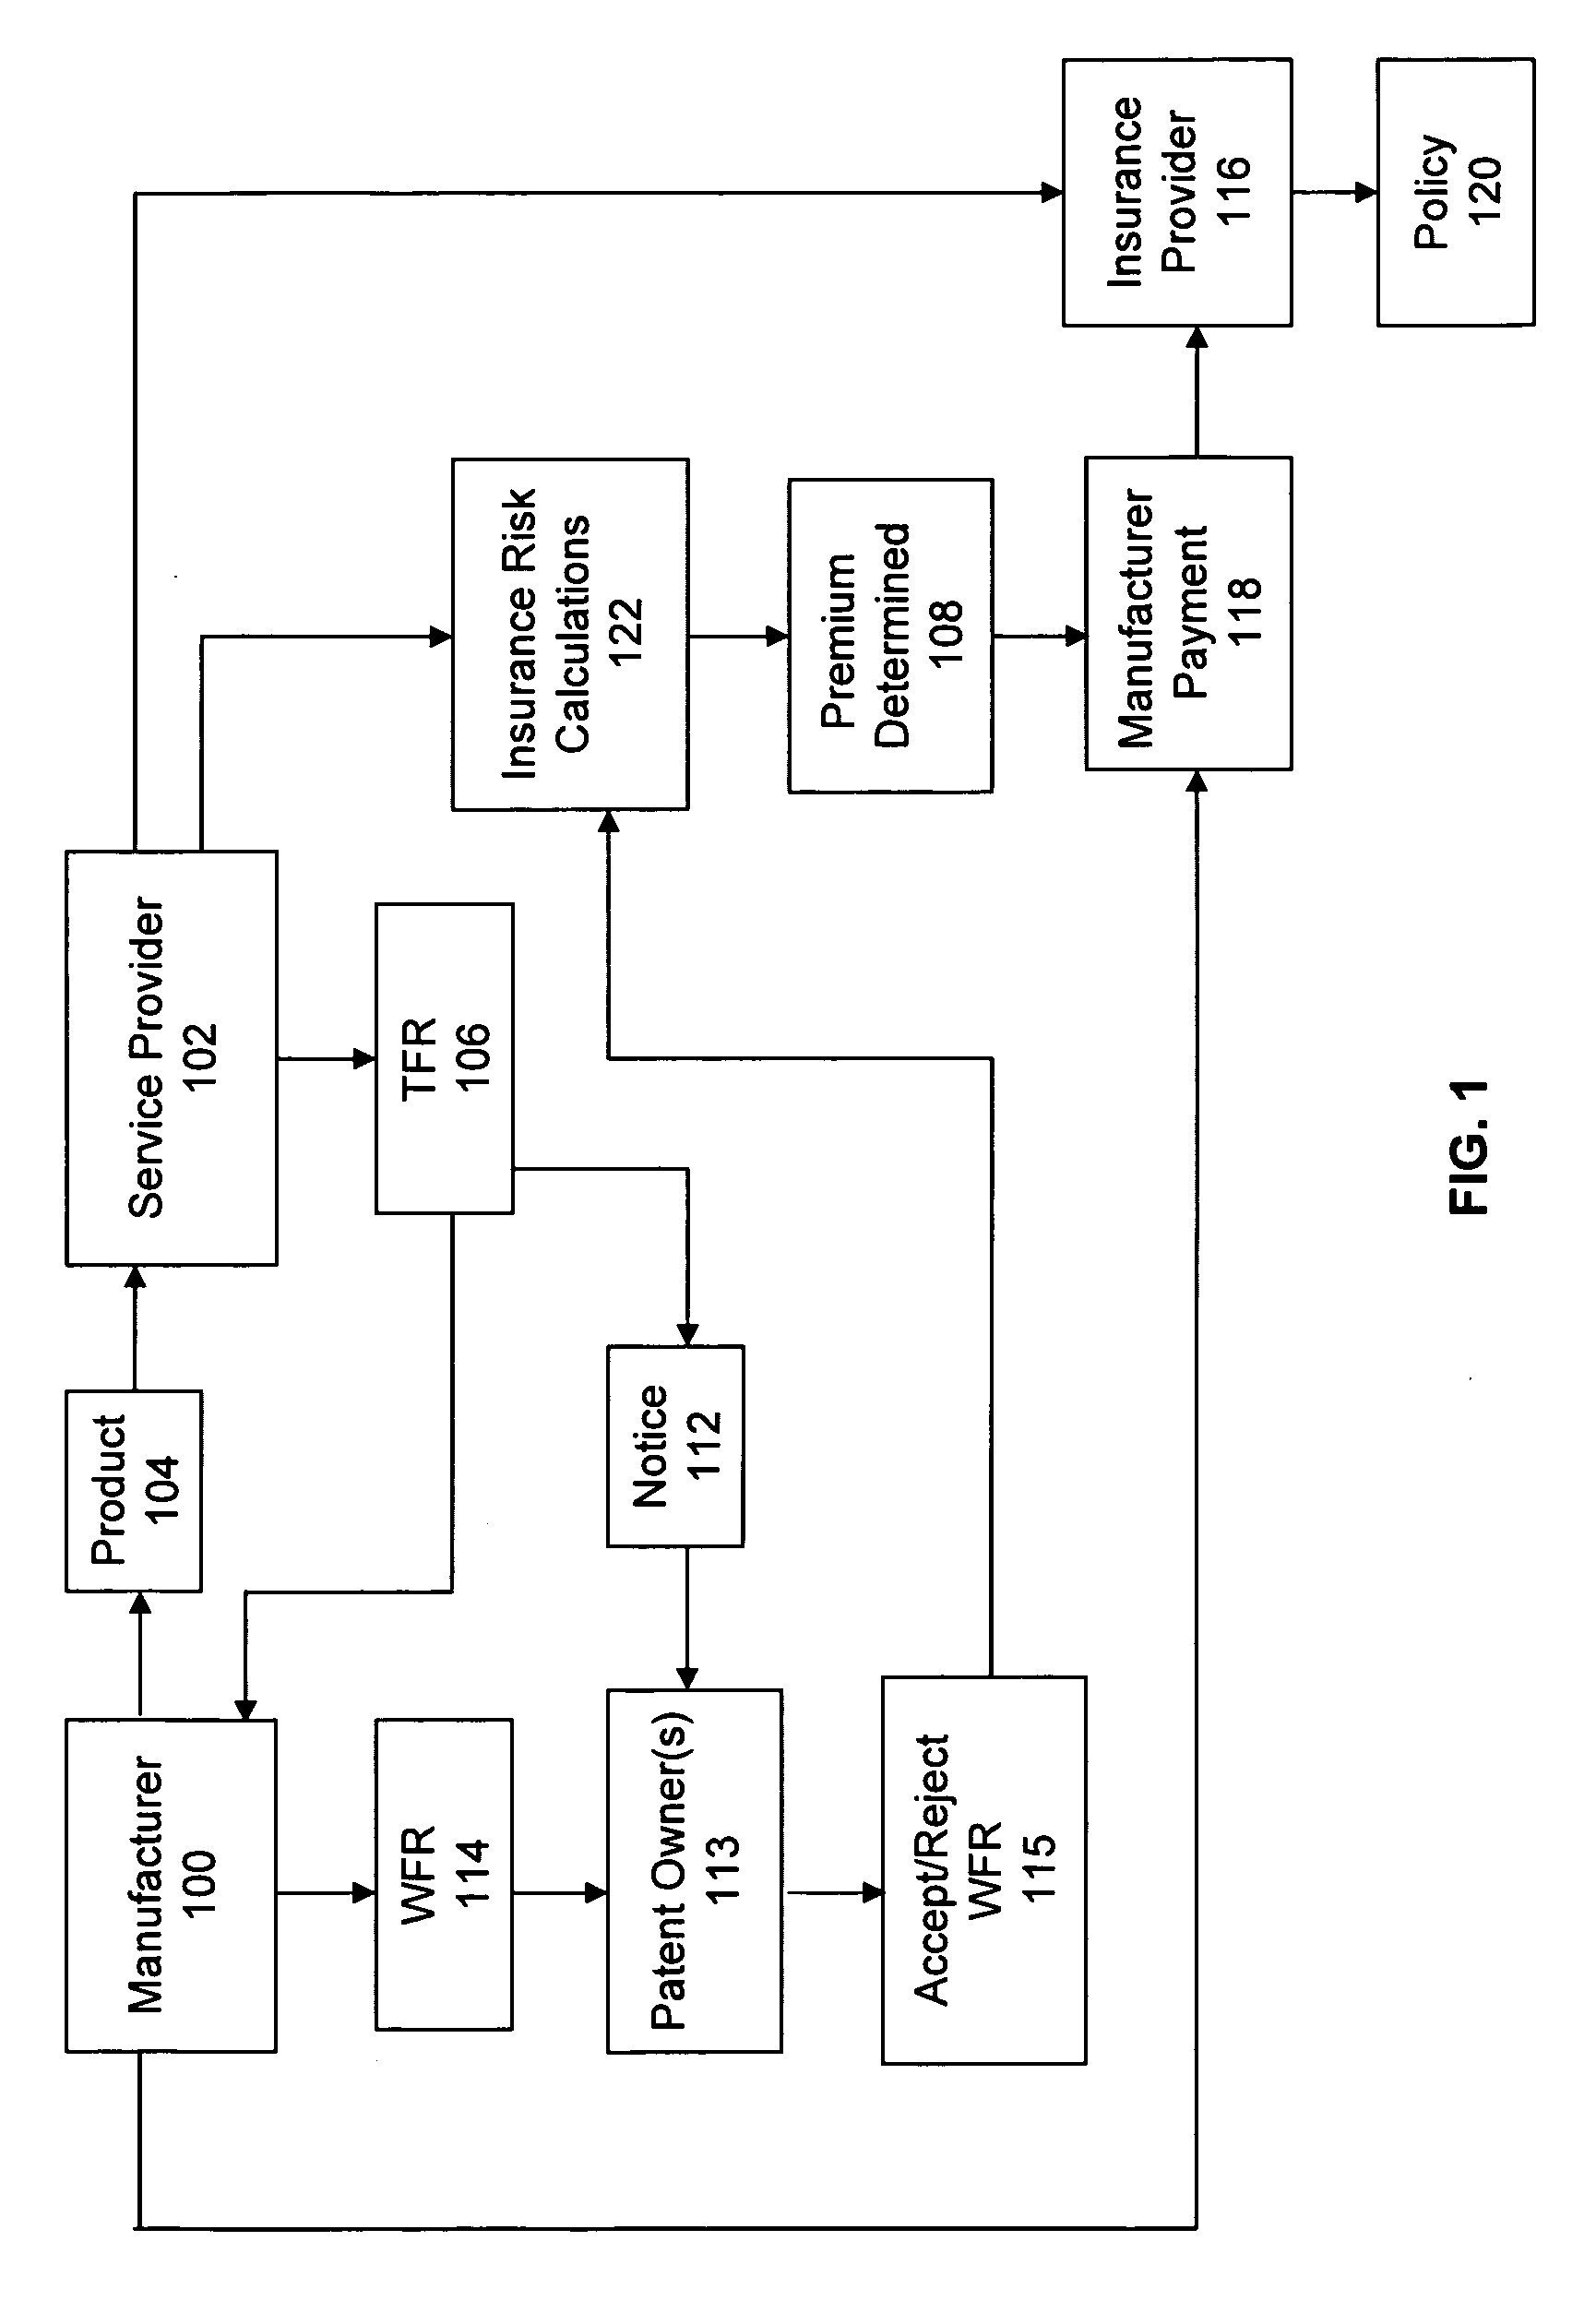 System and method for managing intellectual property-based risks